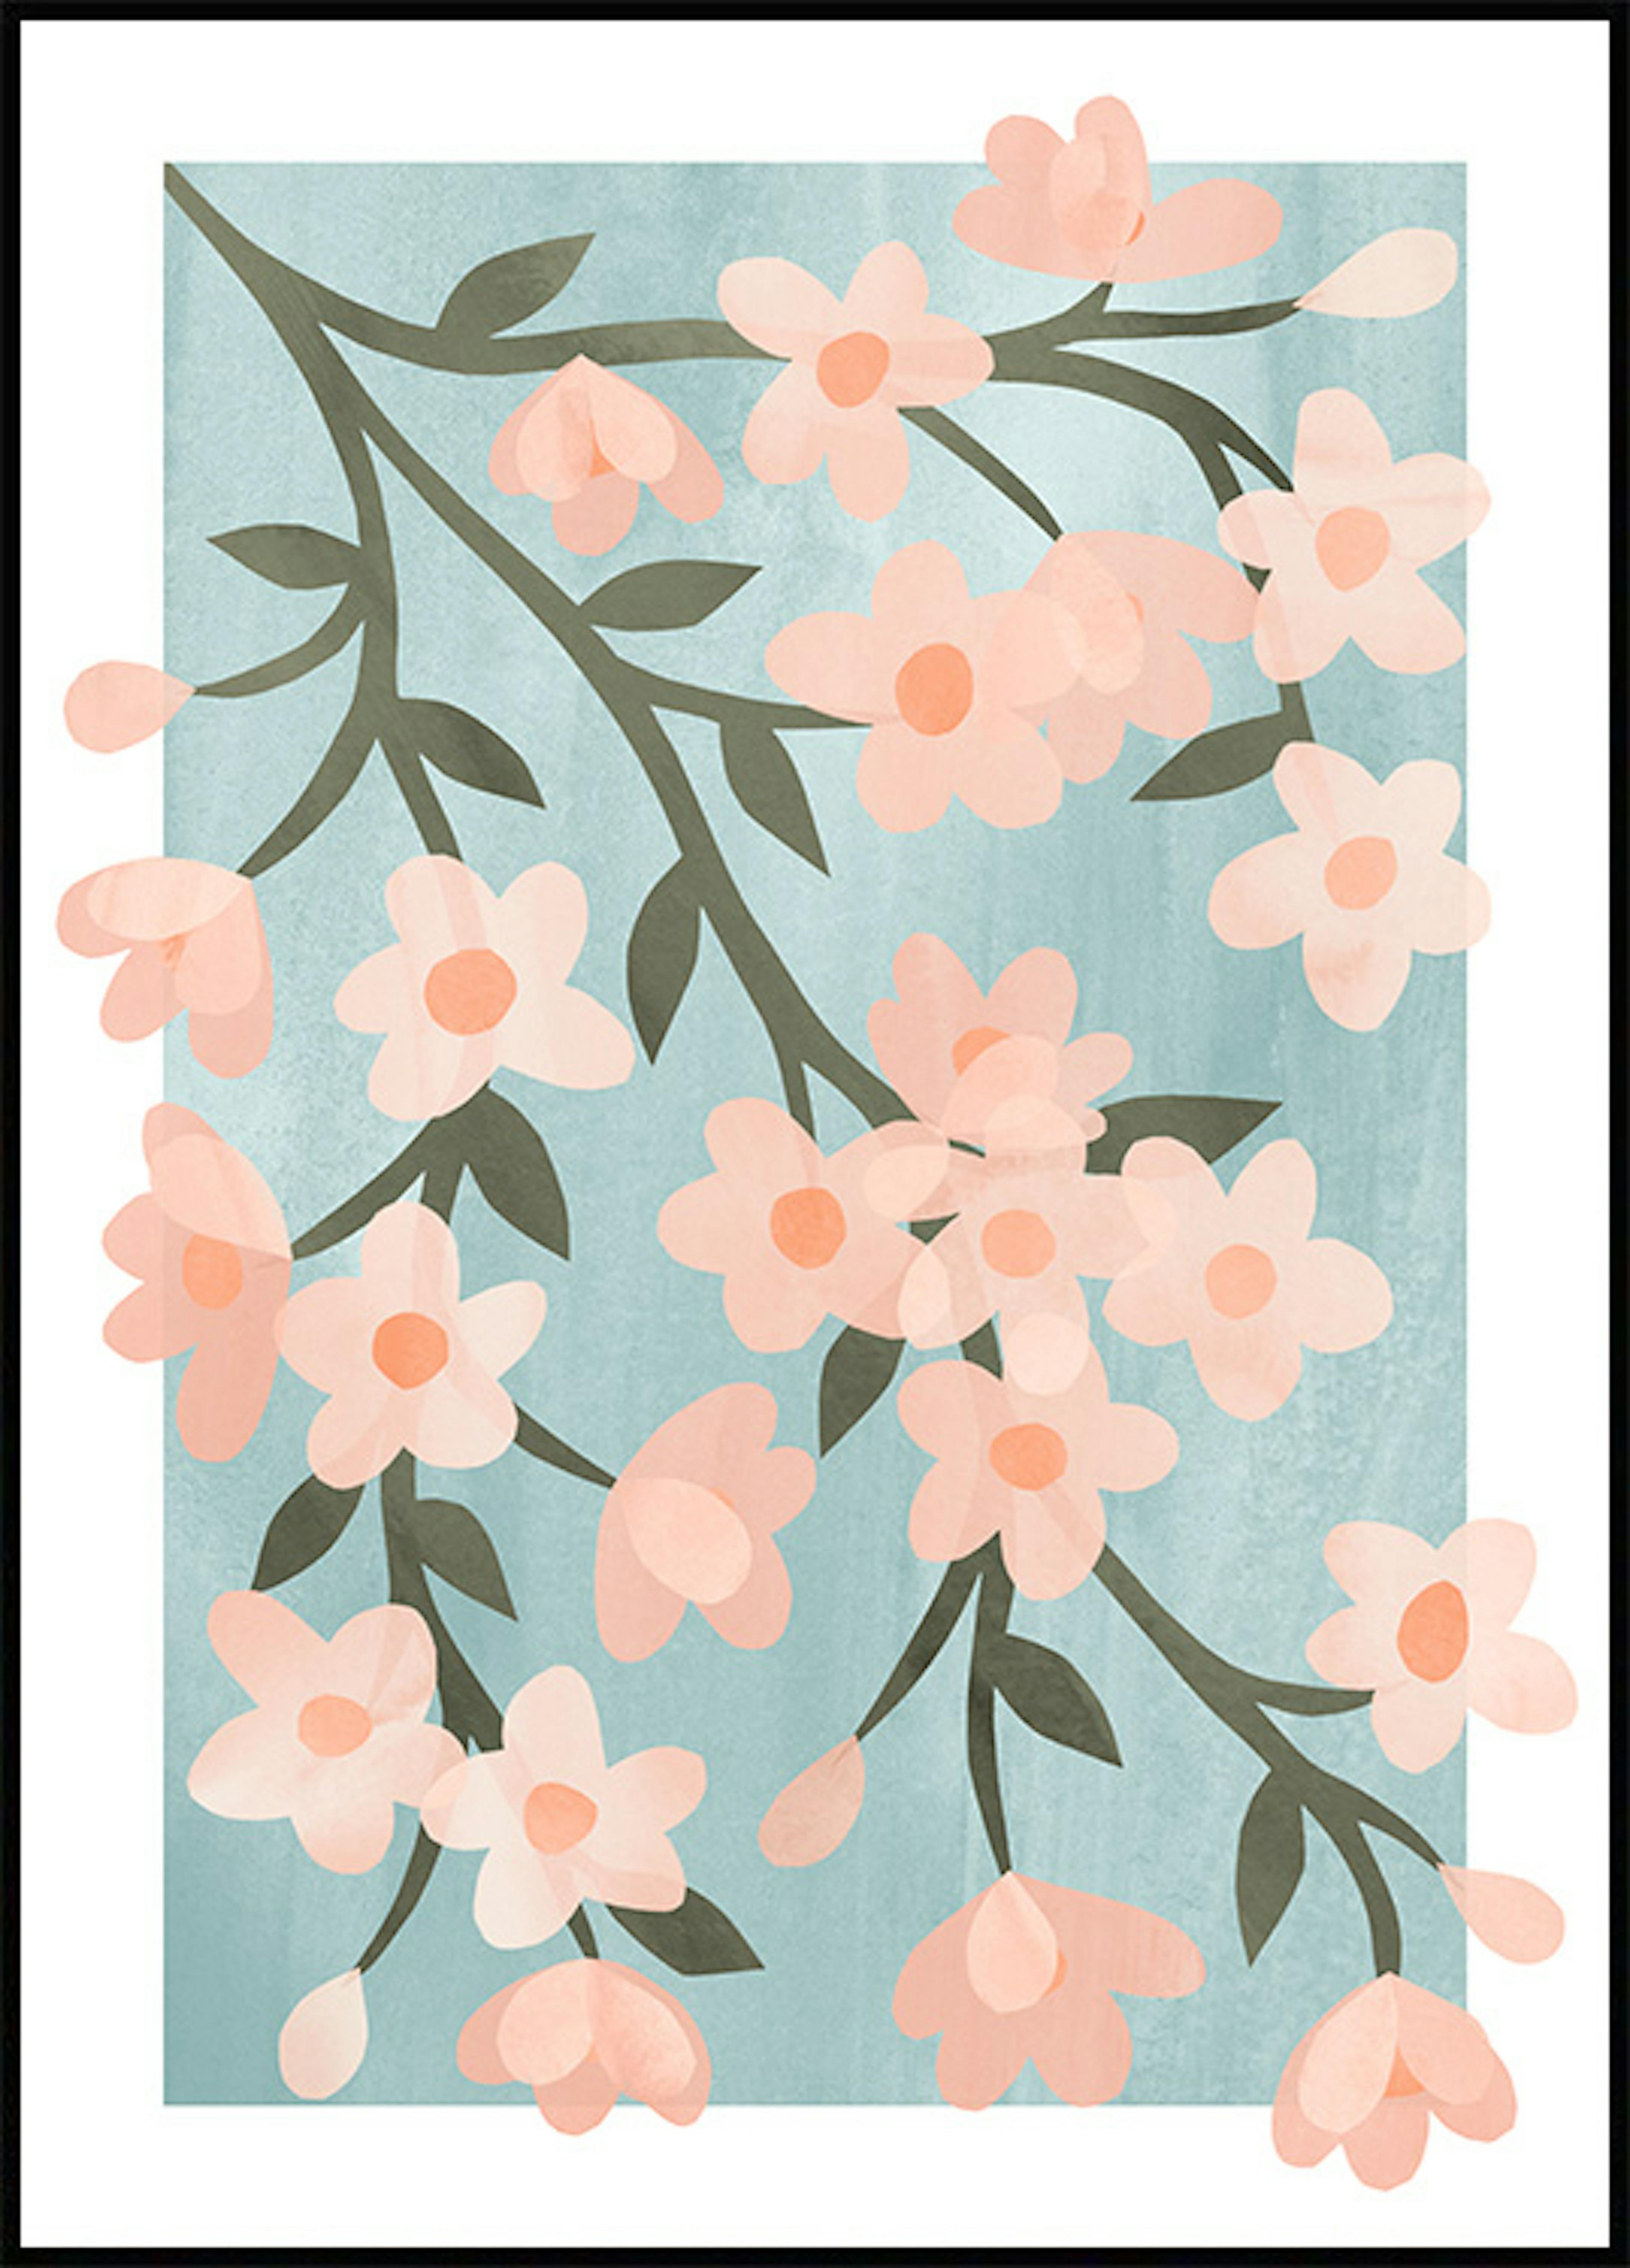 Abstract Cherry Blossom Poster 0